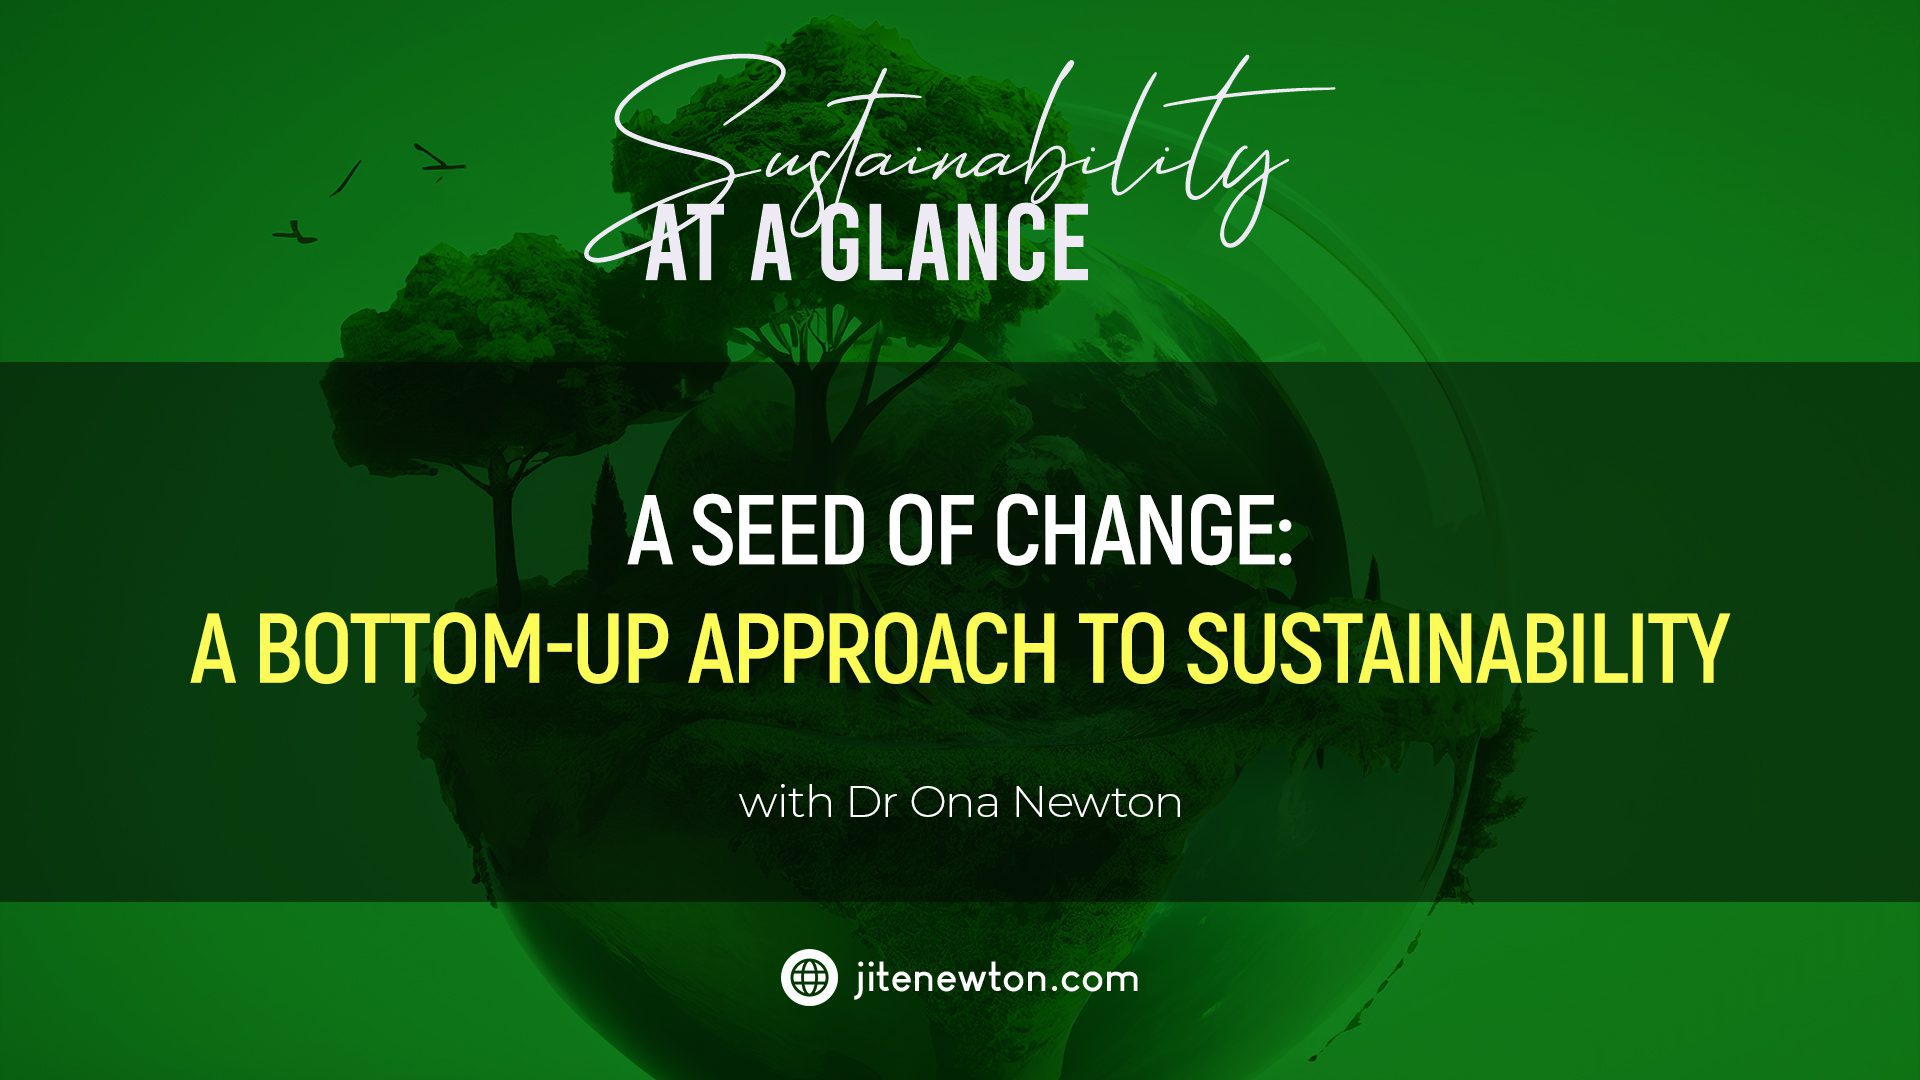 A Seed of Change: A Bottom-up Approach to Sustainability